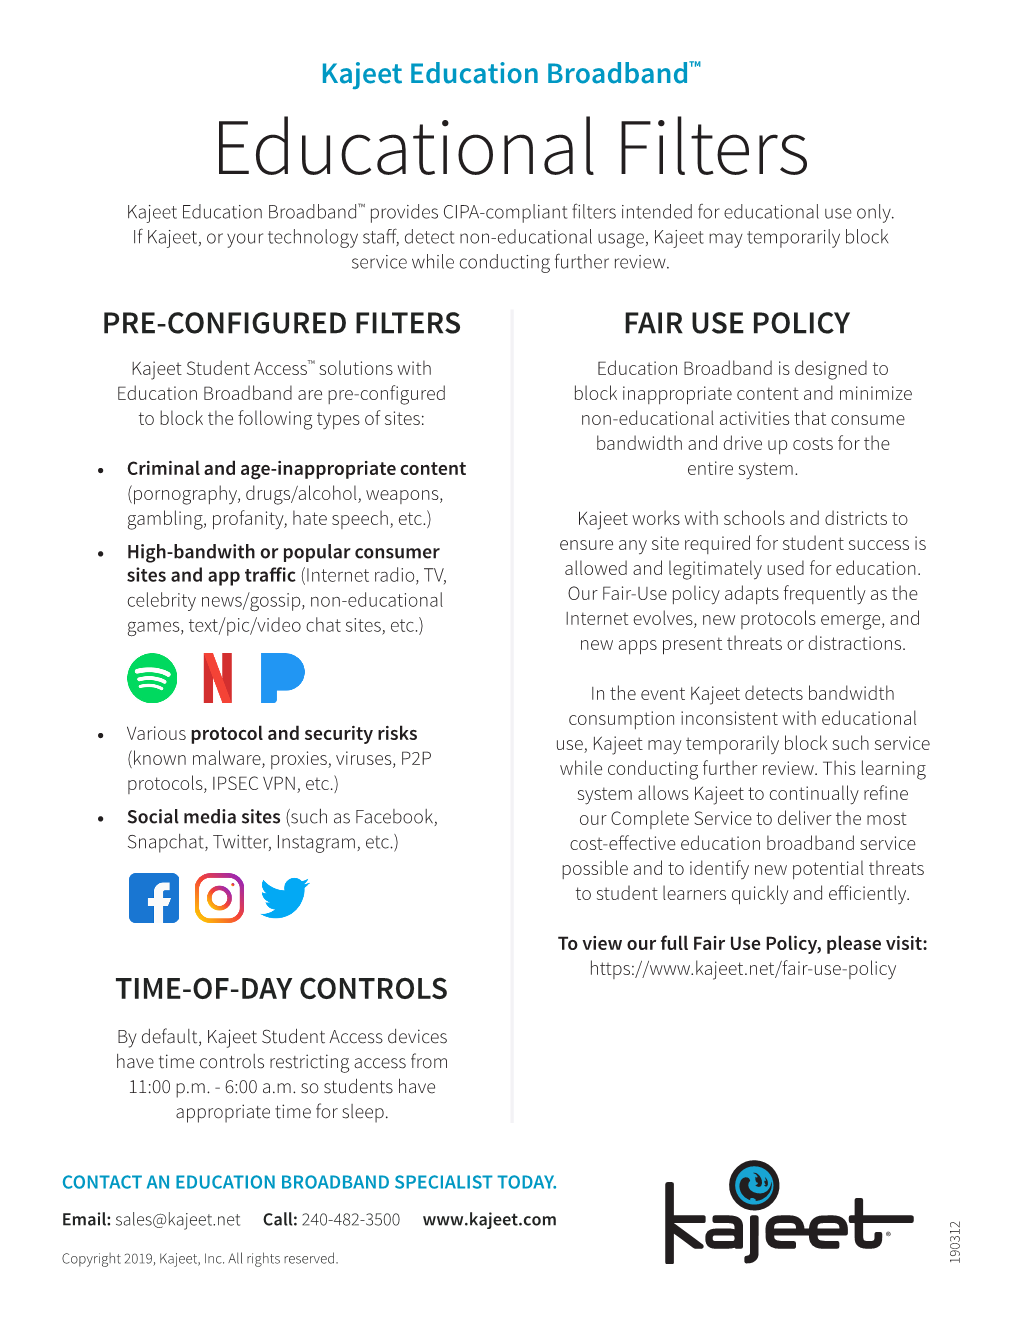 Educational Filters Kajeet Education Broadband™ Provides CIPA-Compliant Filters Intended for Educational Use Only